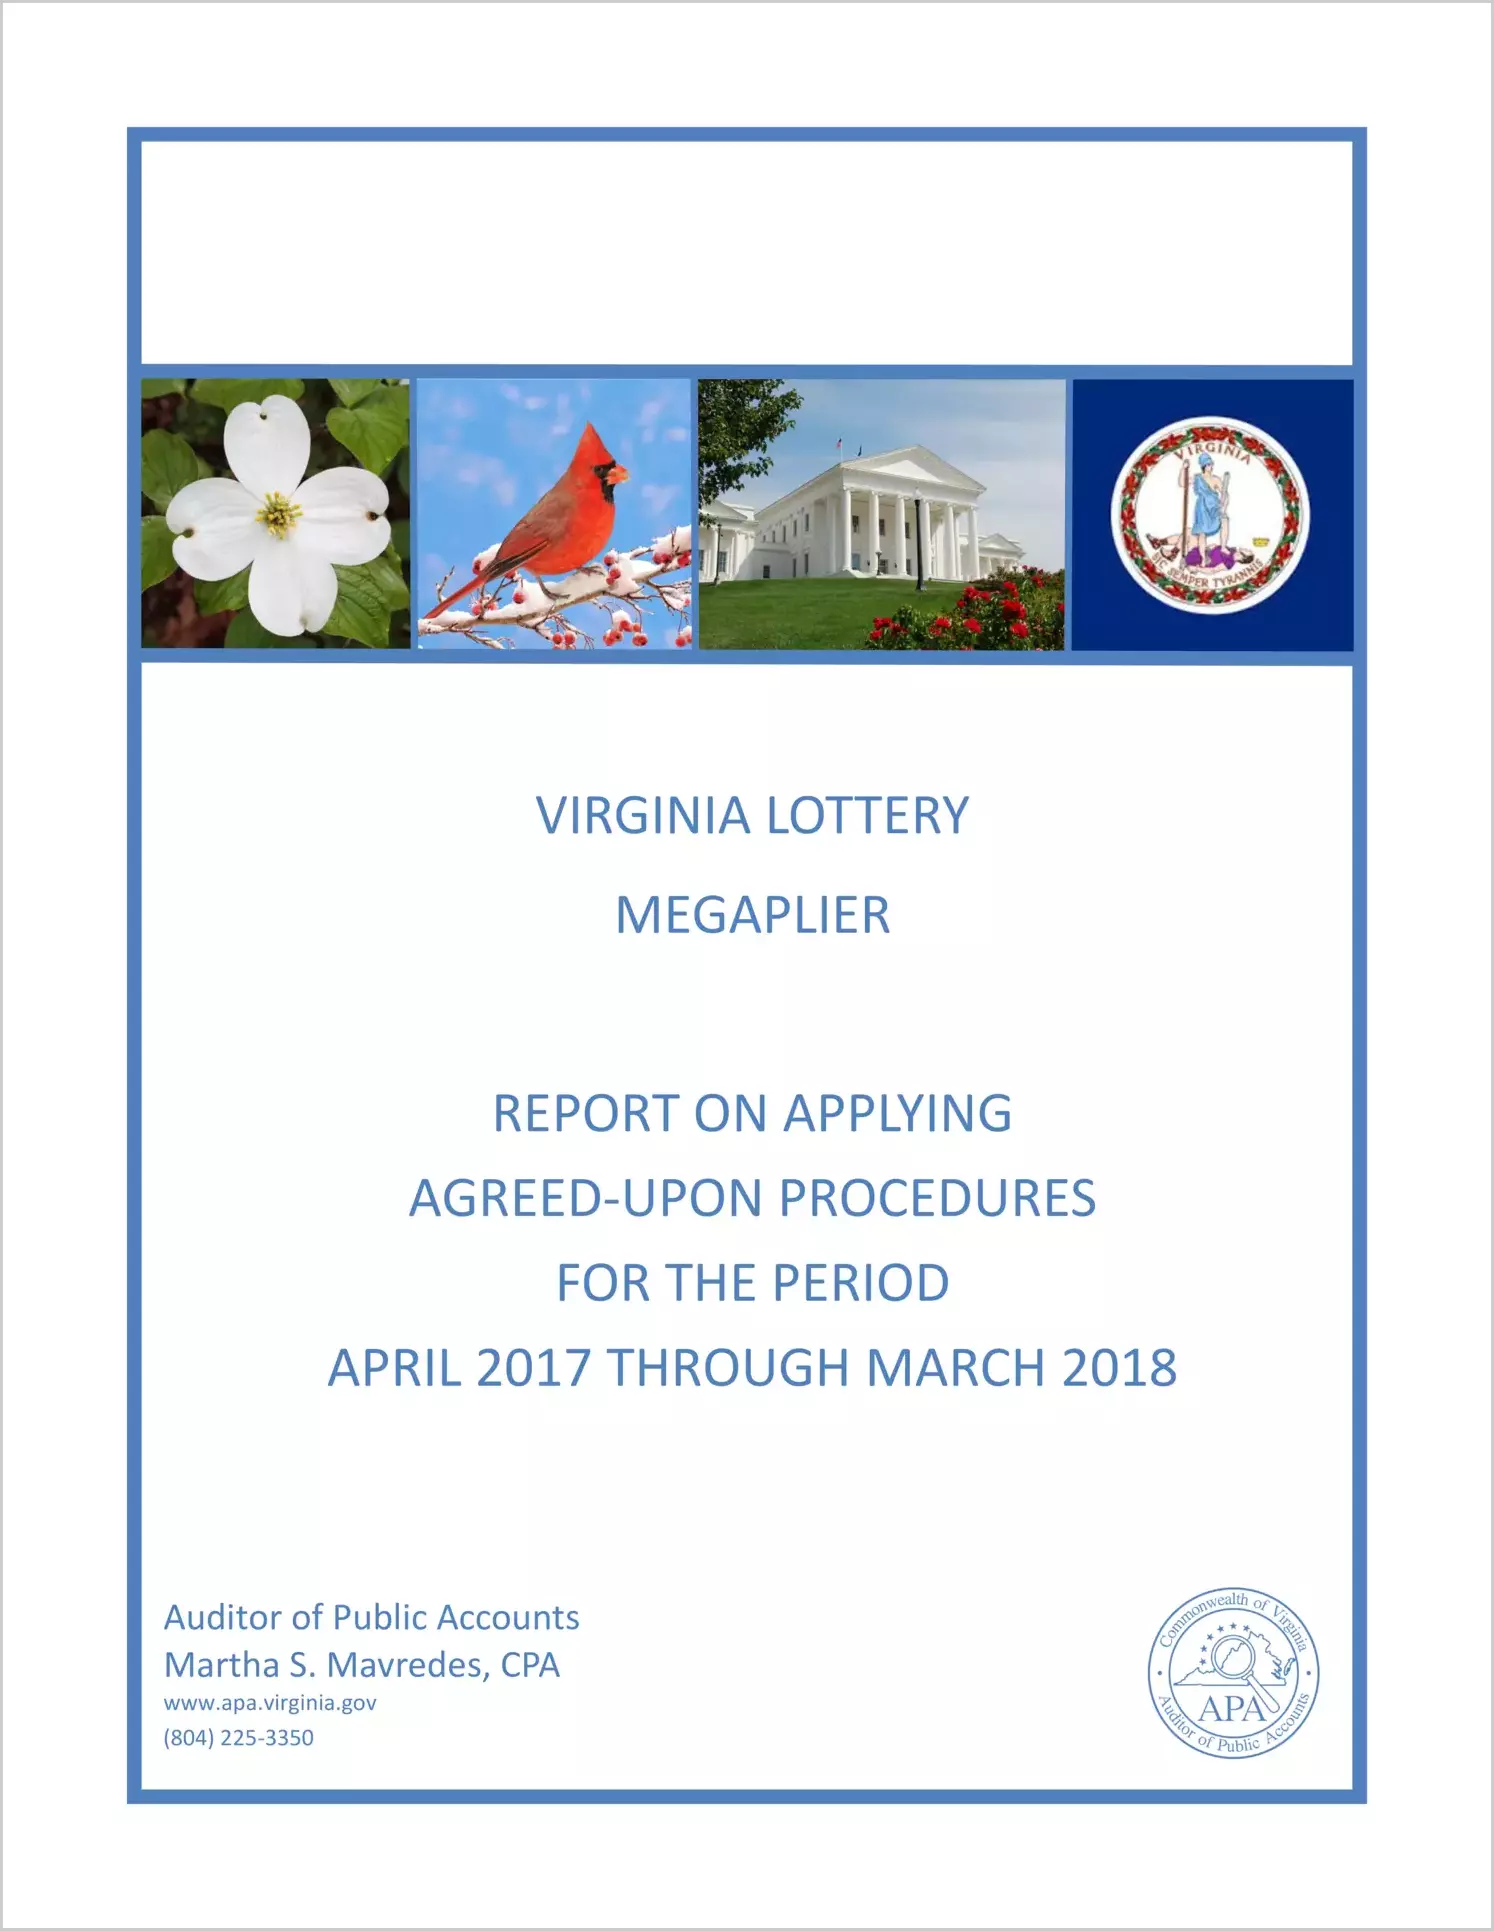 VA Lottery Megaplier report on Applying Agreed-Upon Procedures for the period April 2017 through March 2018